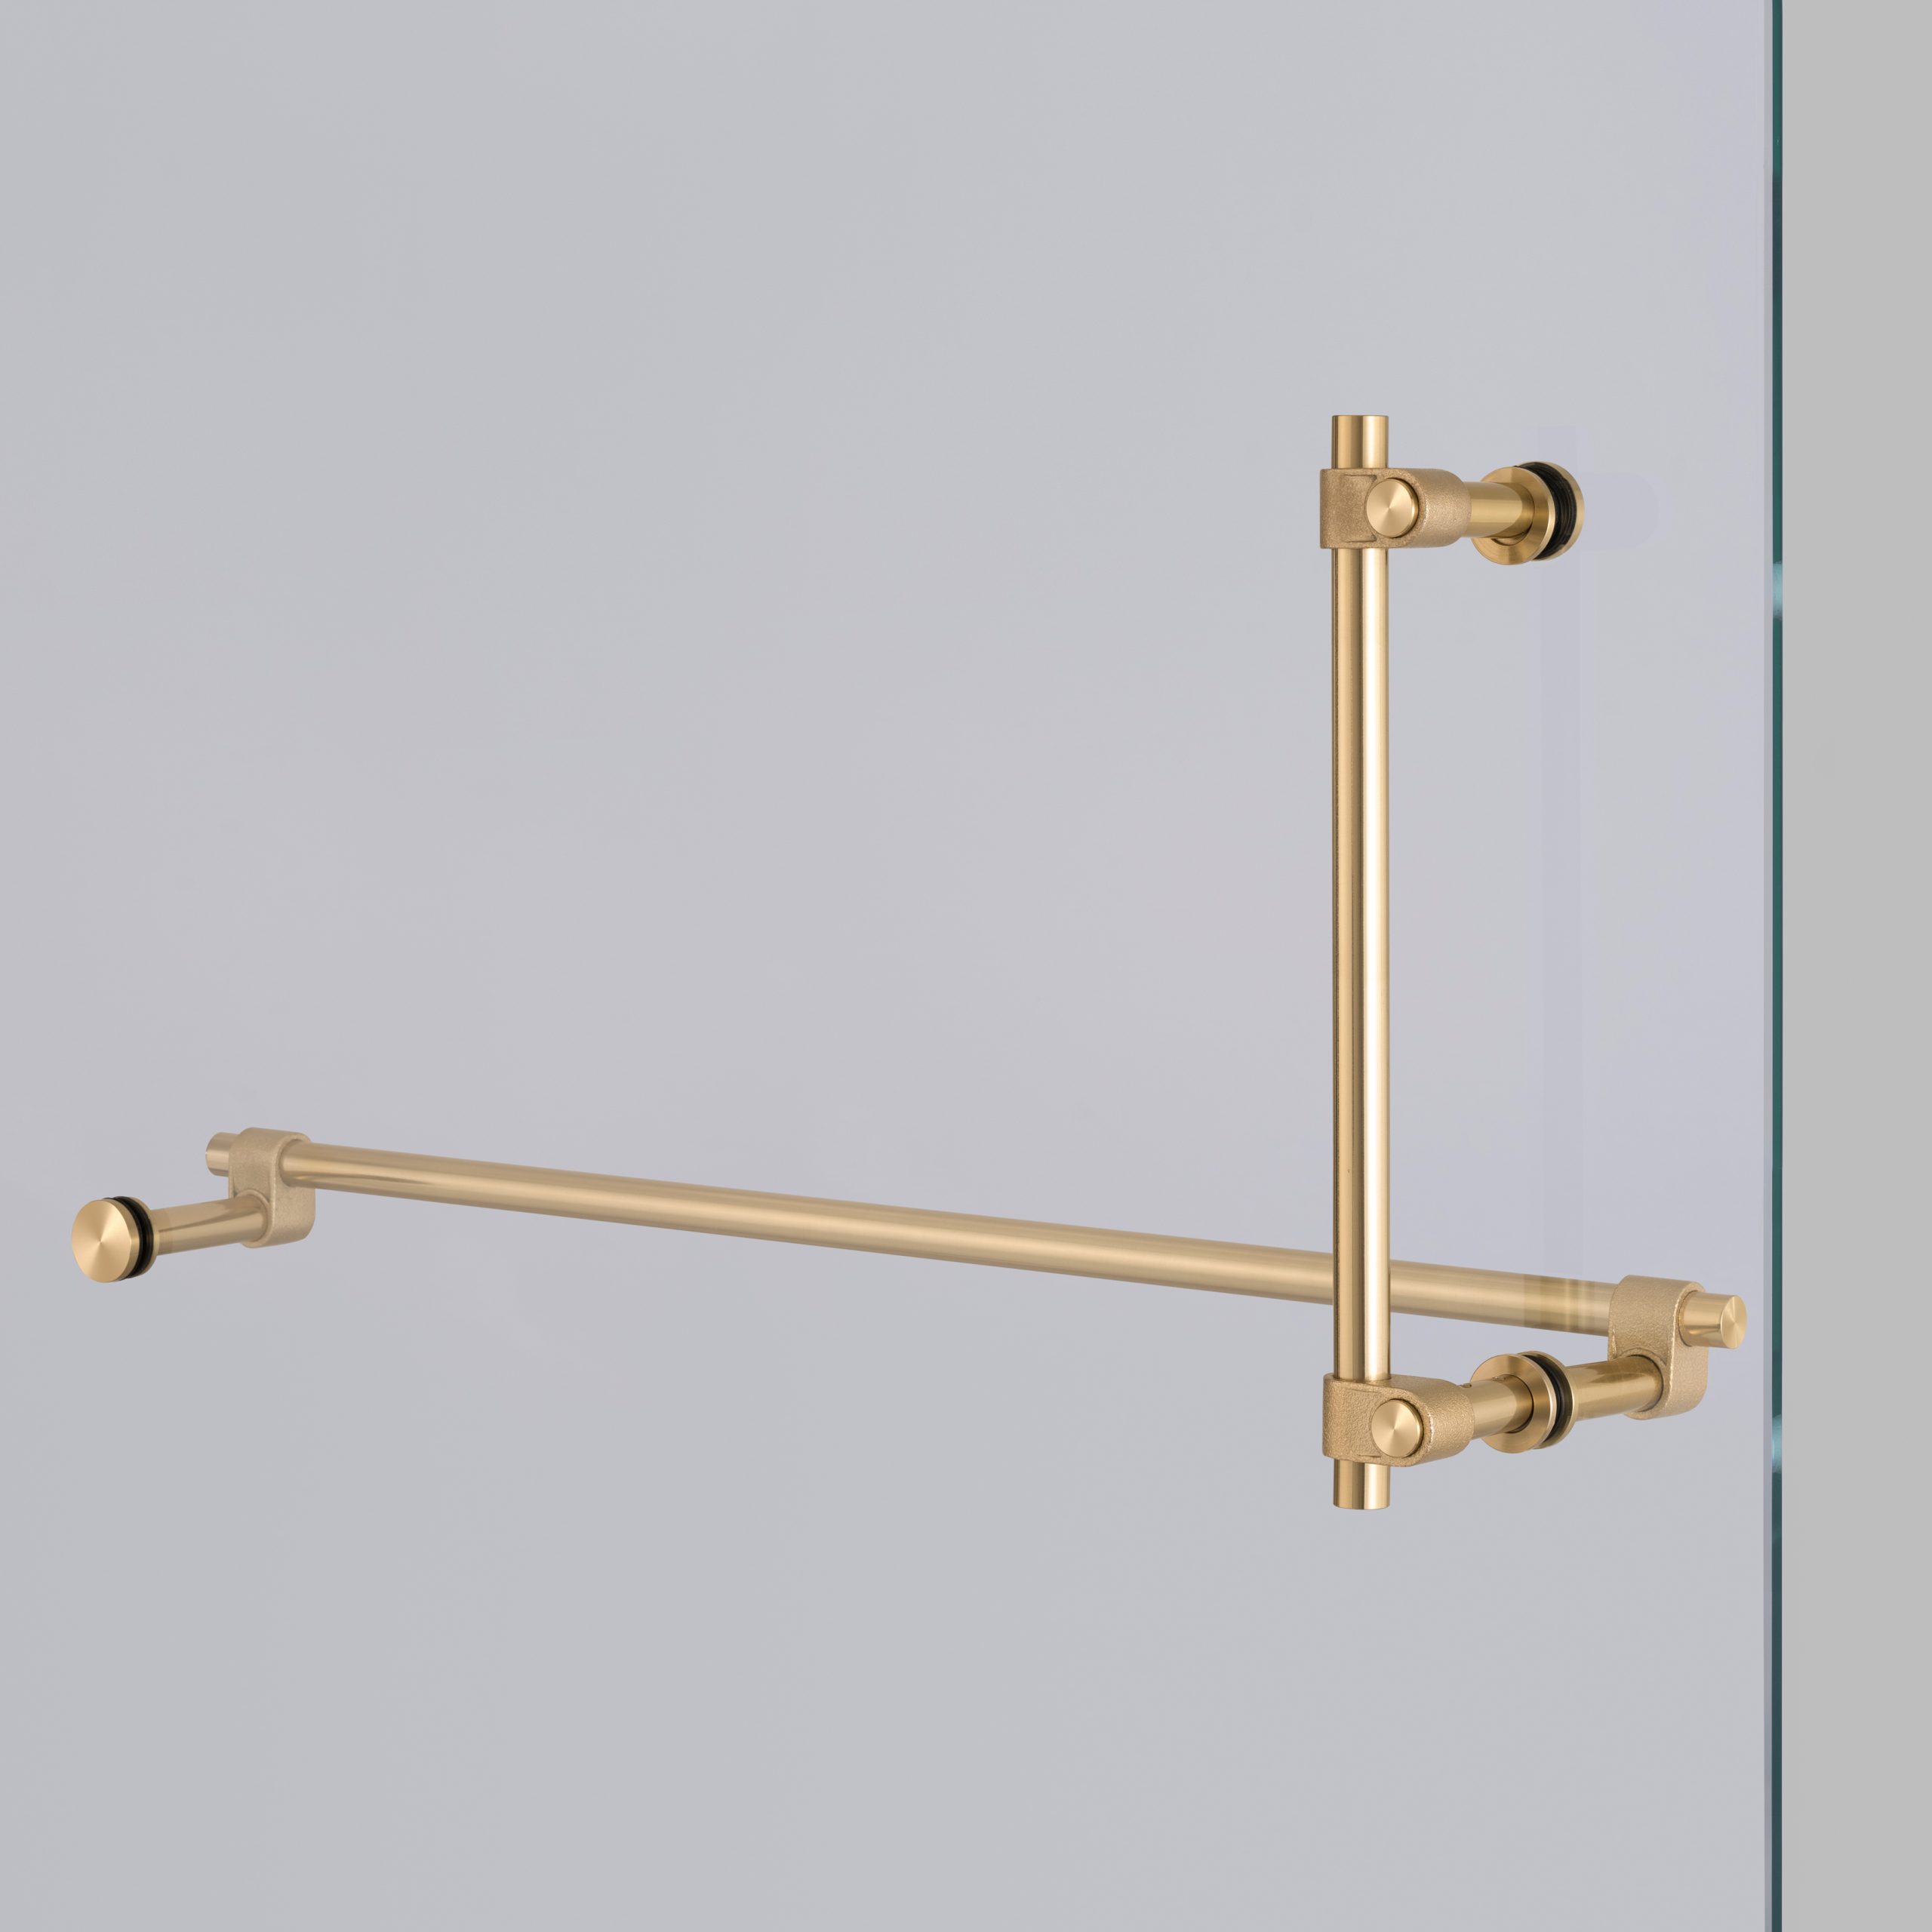 TOWEL RAIL + PULL BAR / DOUBLE-SIDED / CAST / BRASS - Buster + Punch